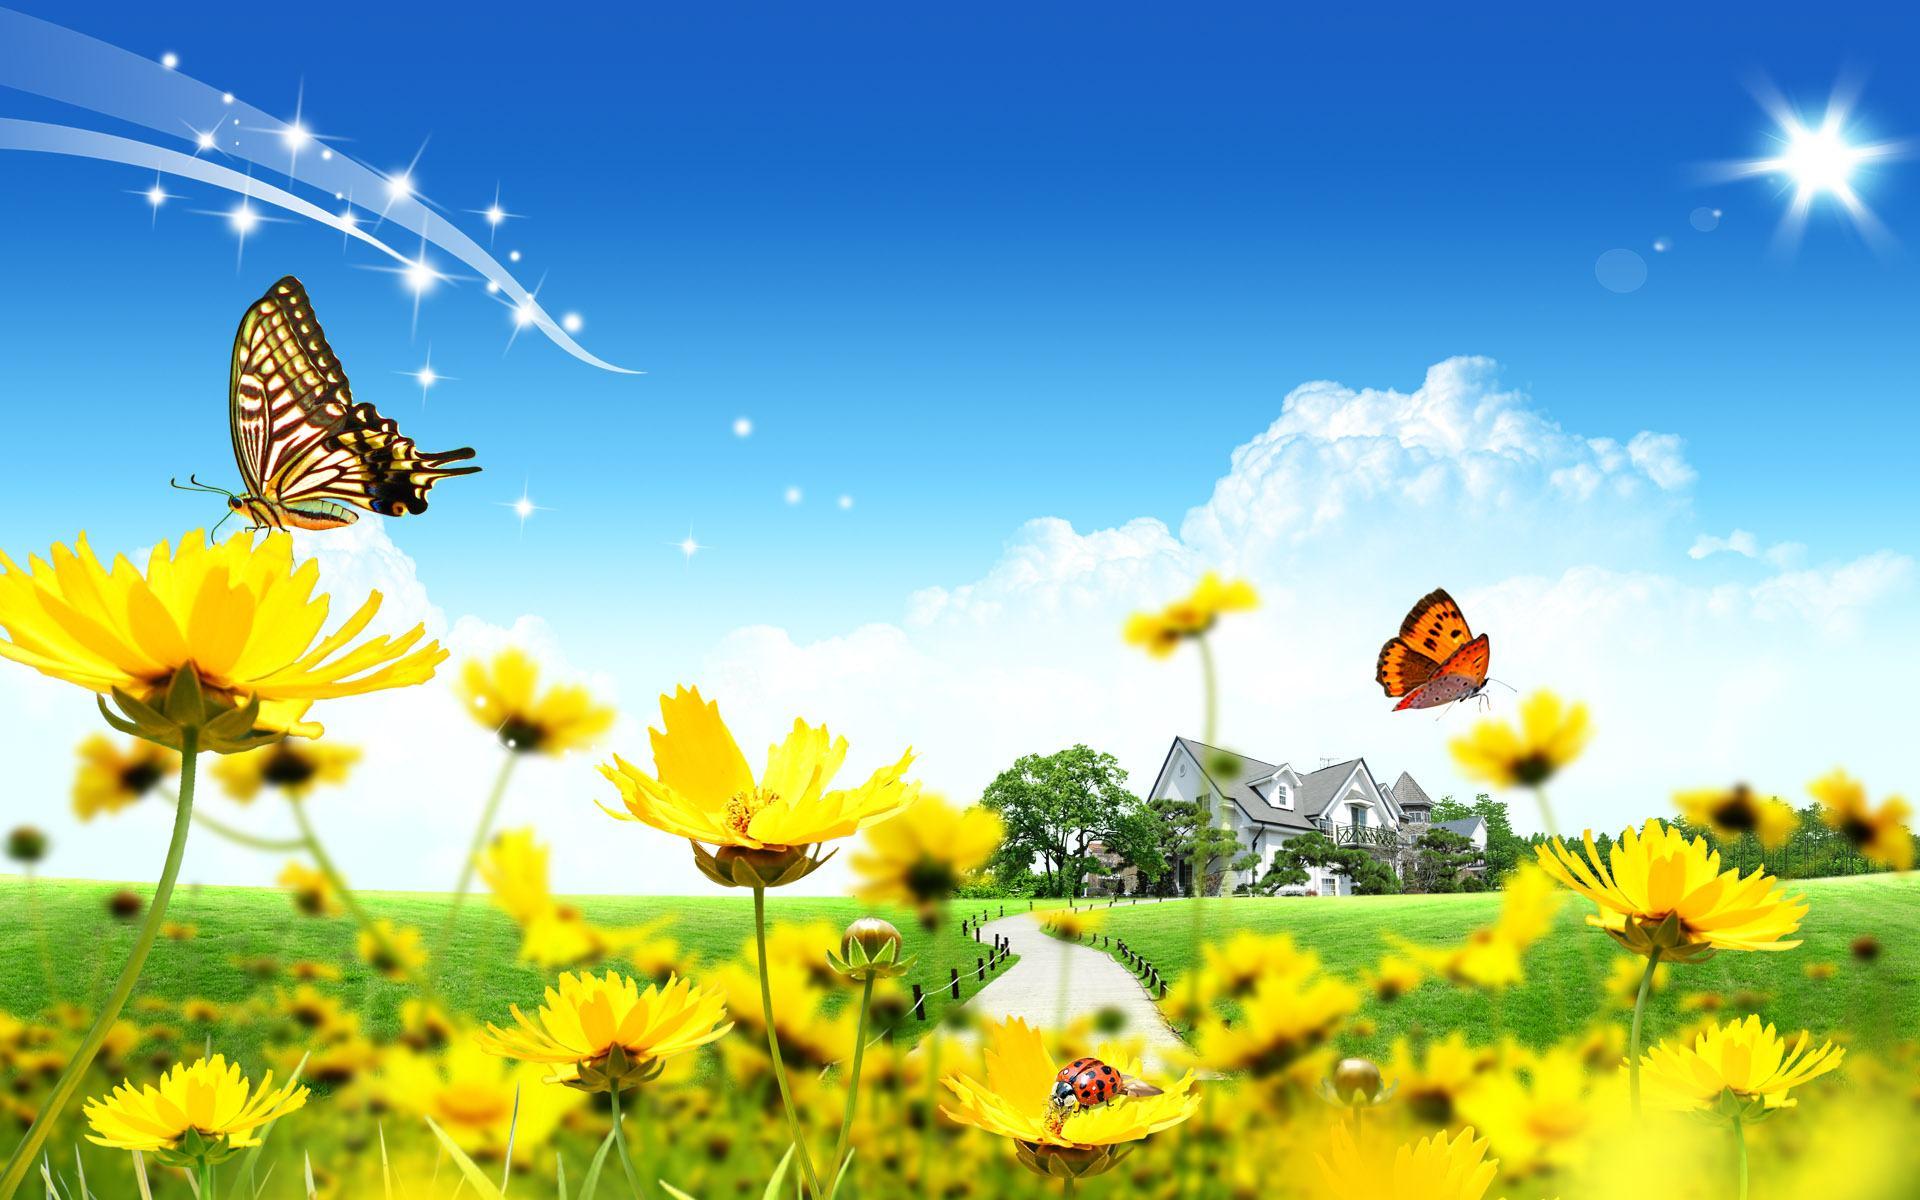 Pretty Sunny Day Wallpapers - Wallpaper Cave